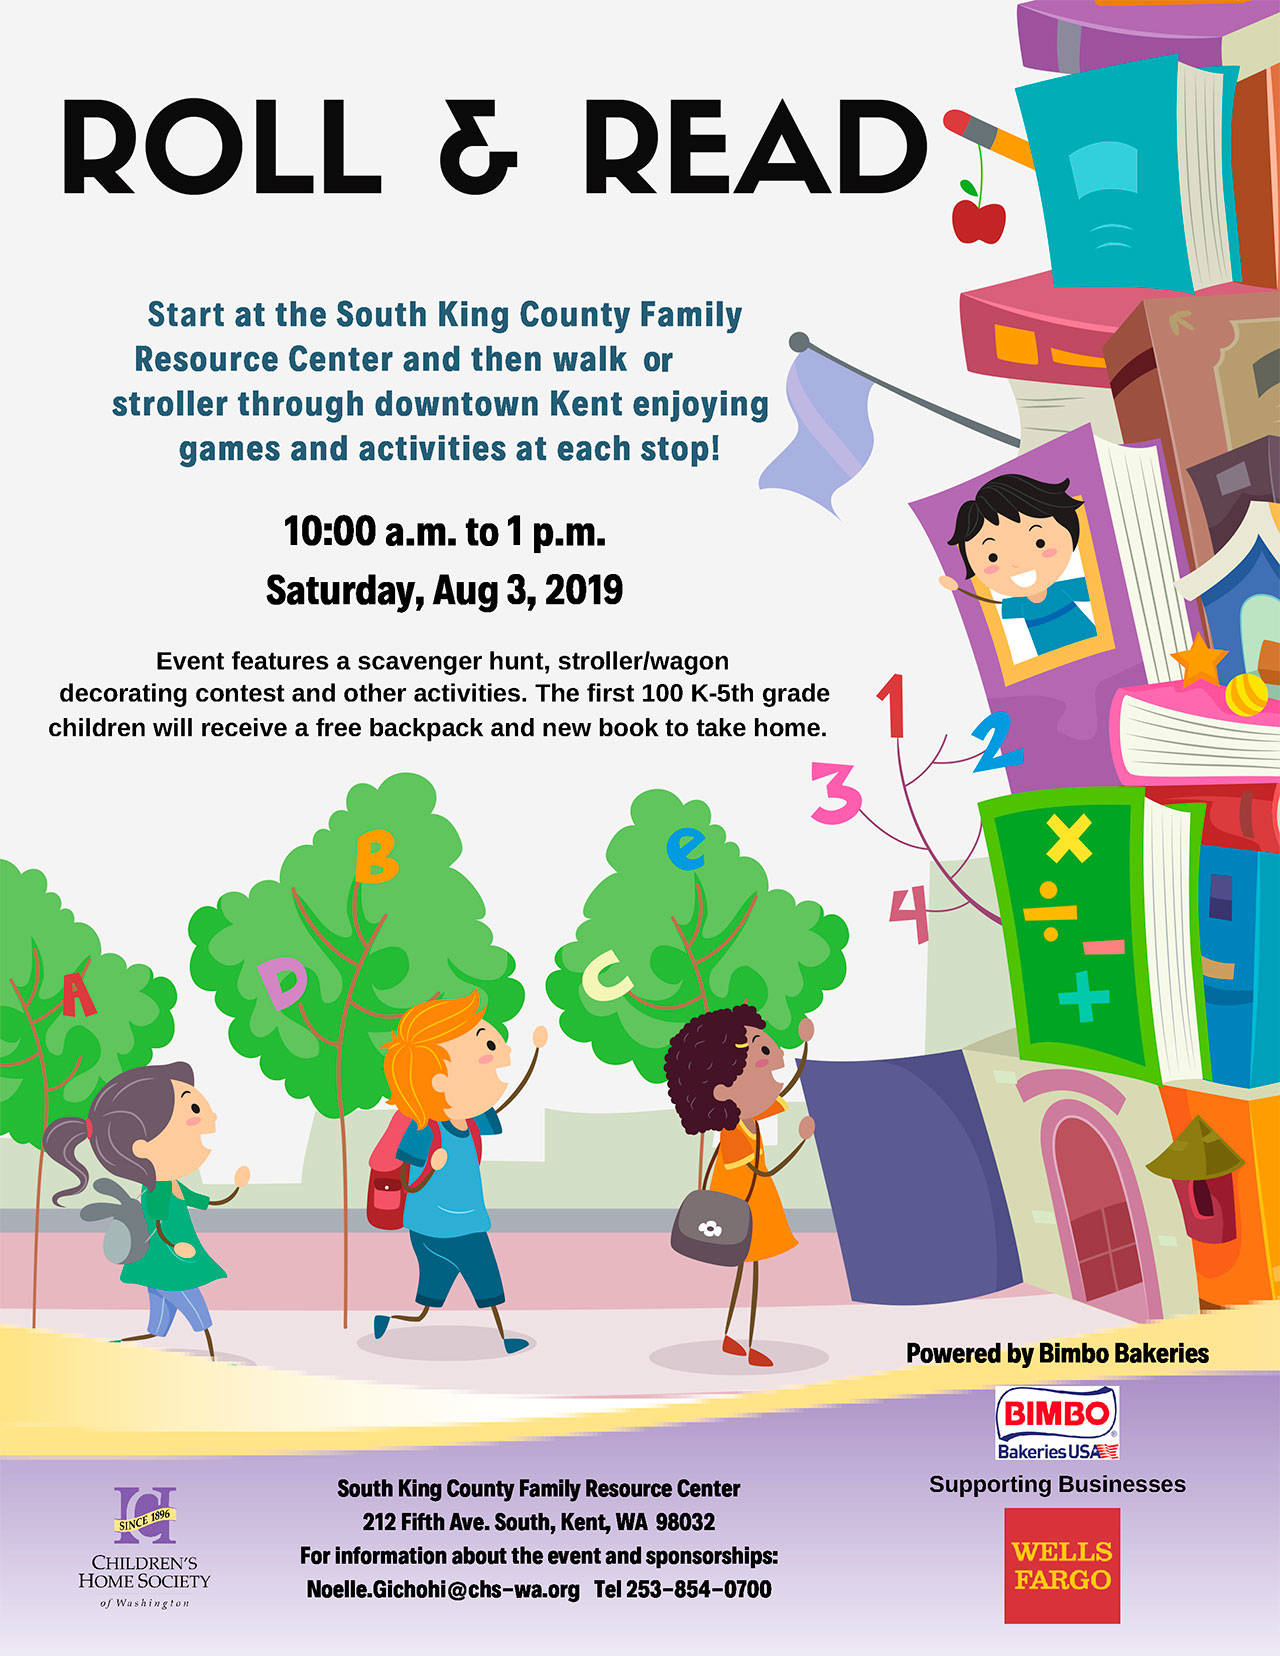 Celebrate learning at Roll & Read event in Kent on Aug. 3